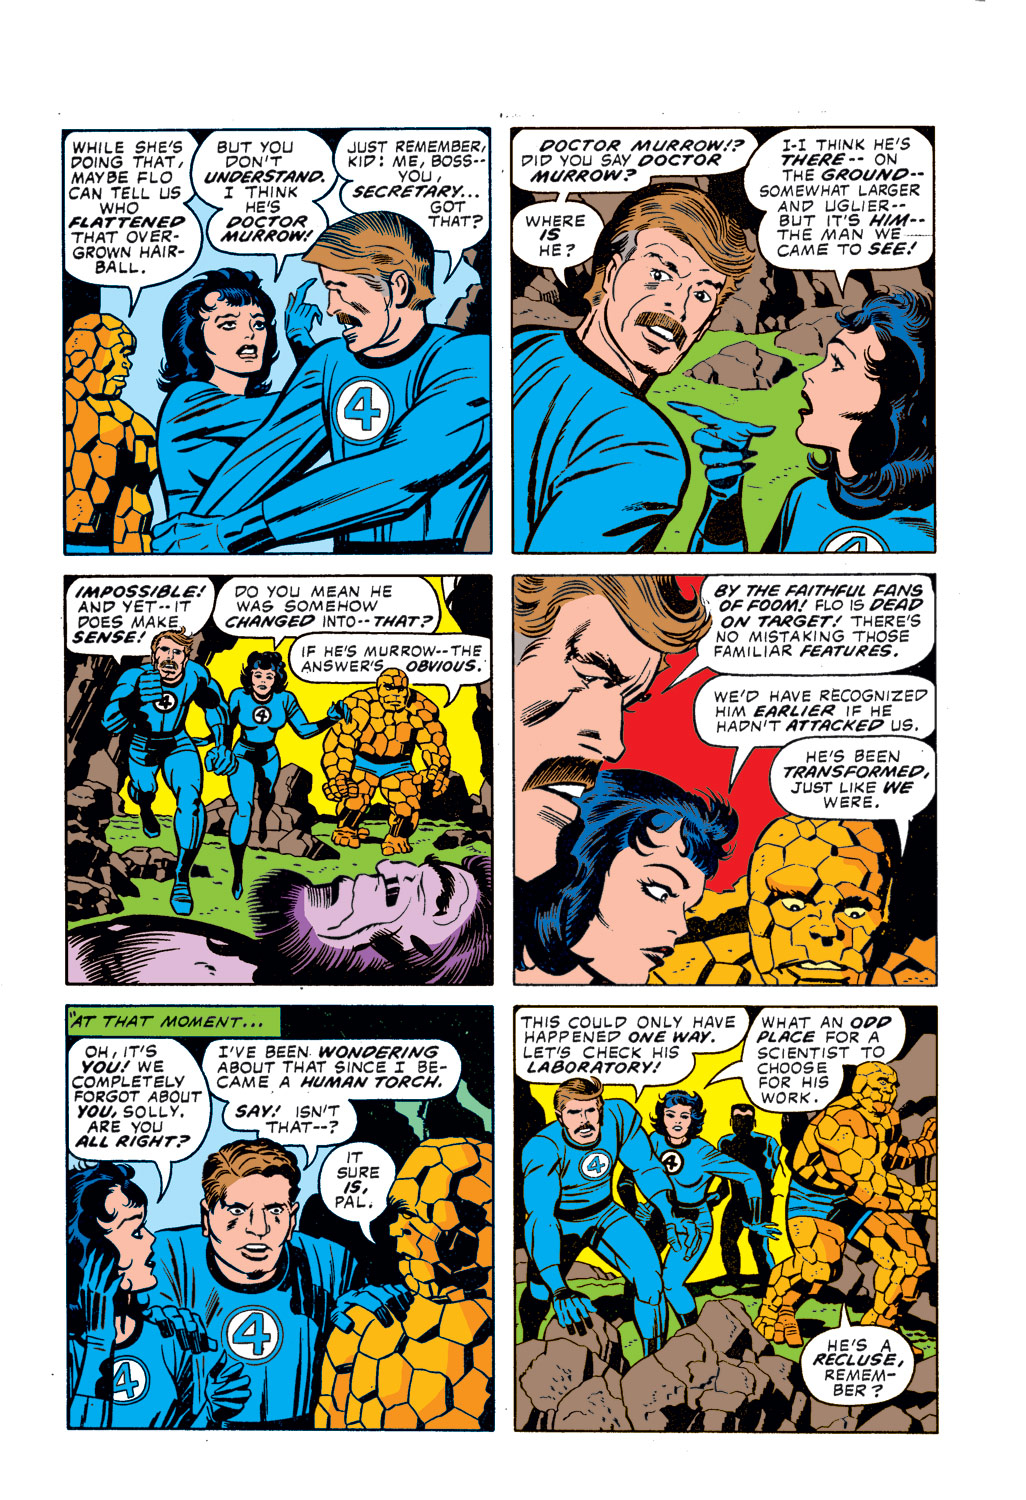 What If? (1977) issue 11 - The original marvel bullpen had become the Fantastic Four - Page 6